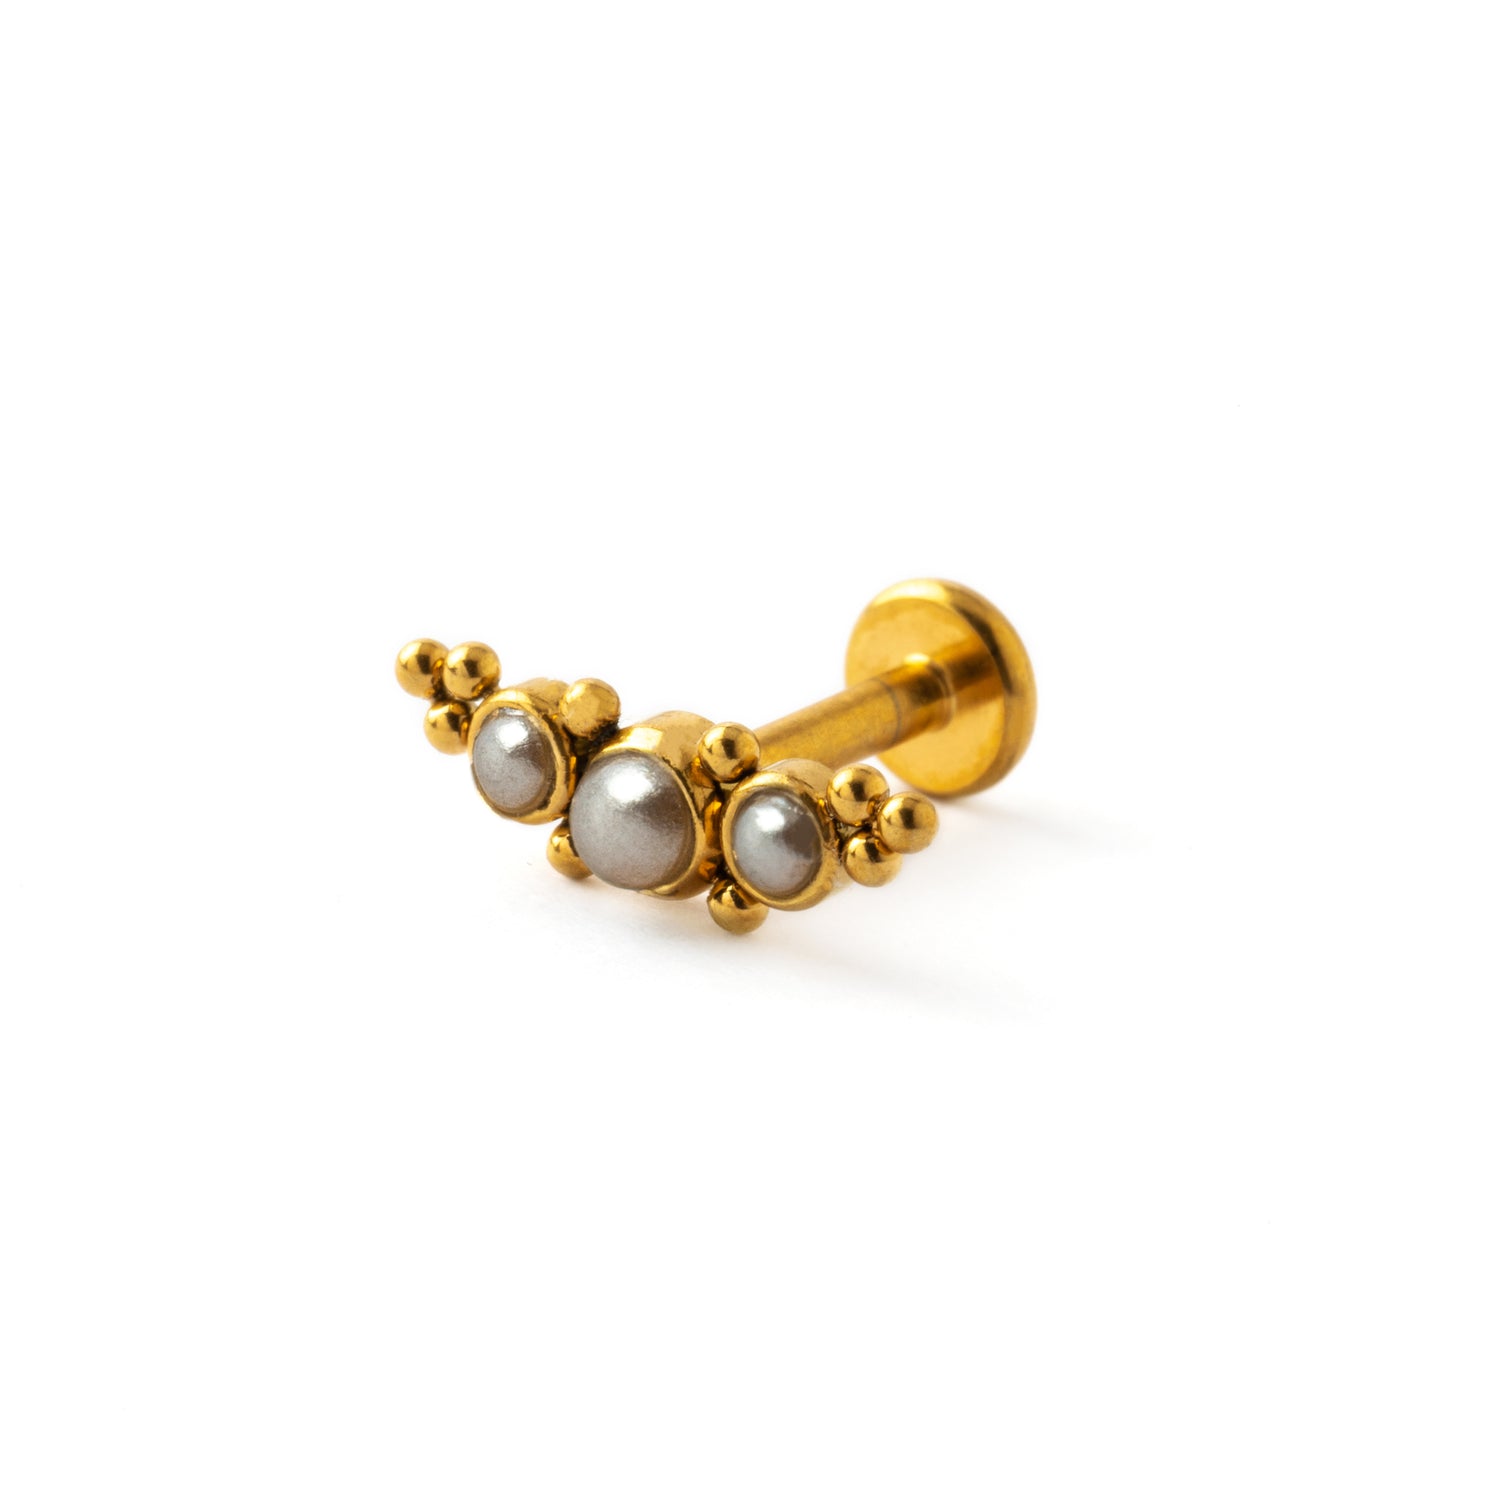 Deva Golden surgical steel Labret with Pearls right side view